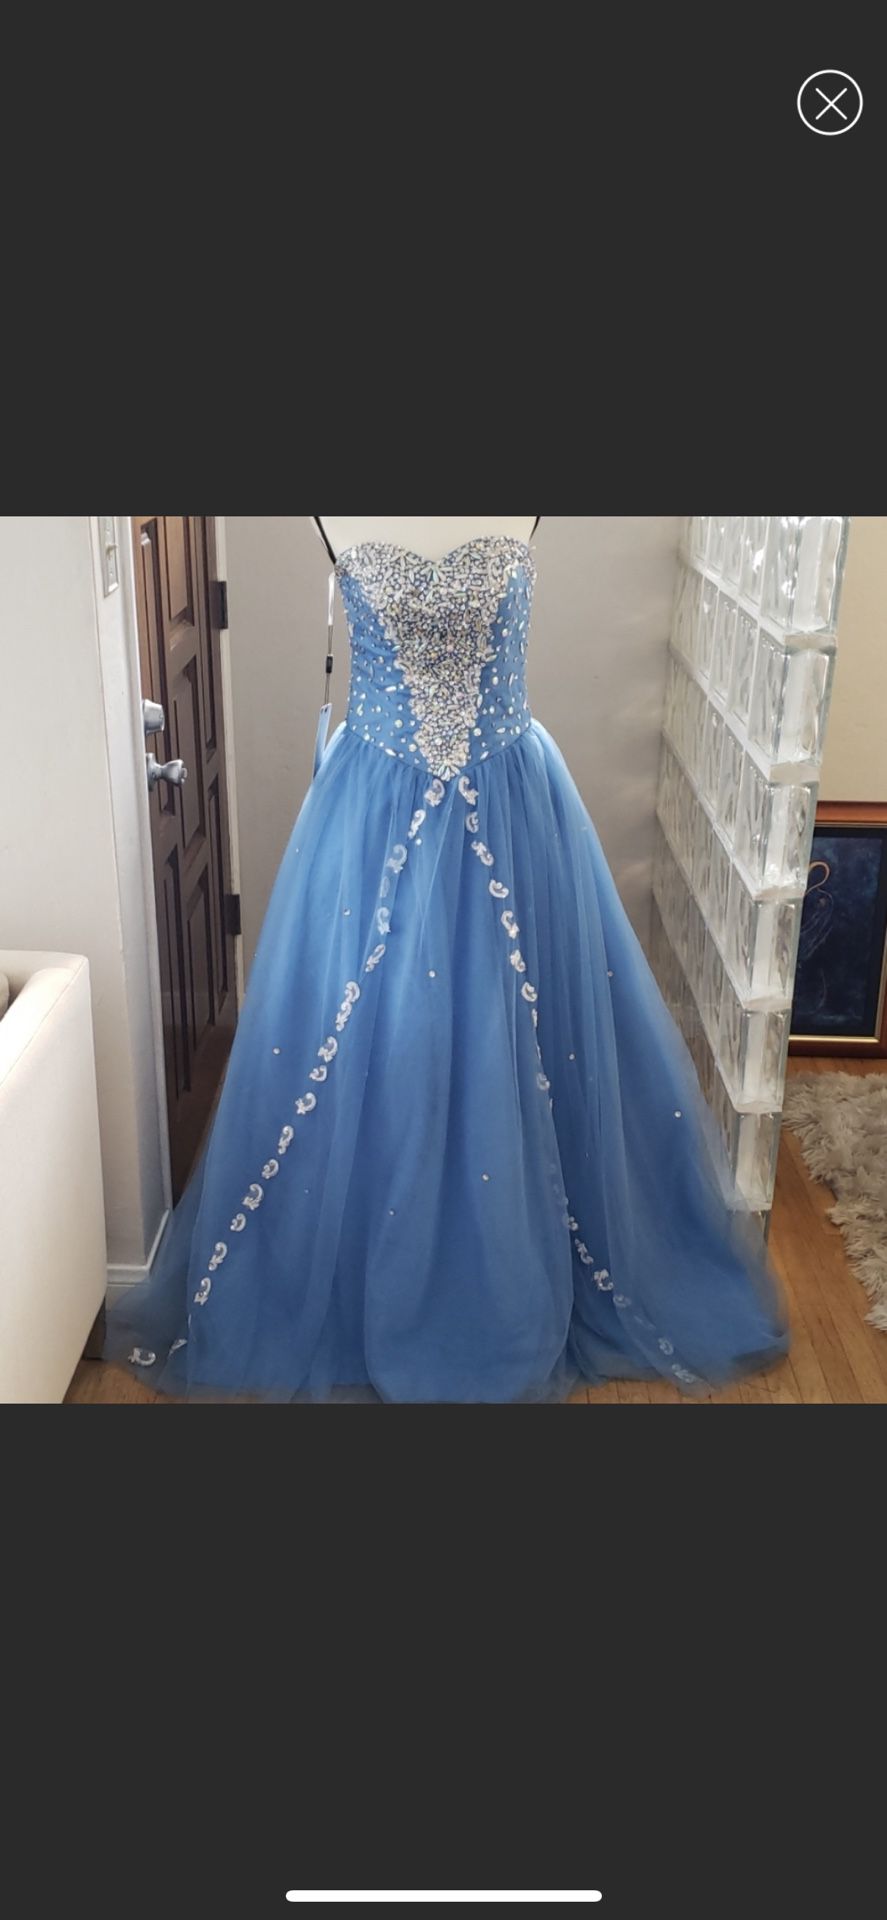 NEW Blue Ball Gown For Quinceanera or Prom Dress